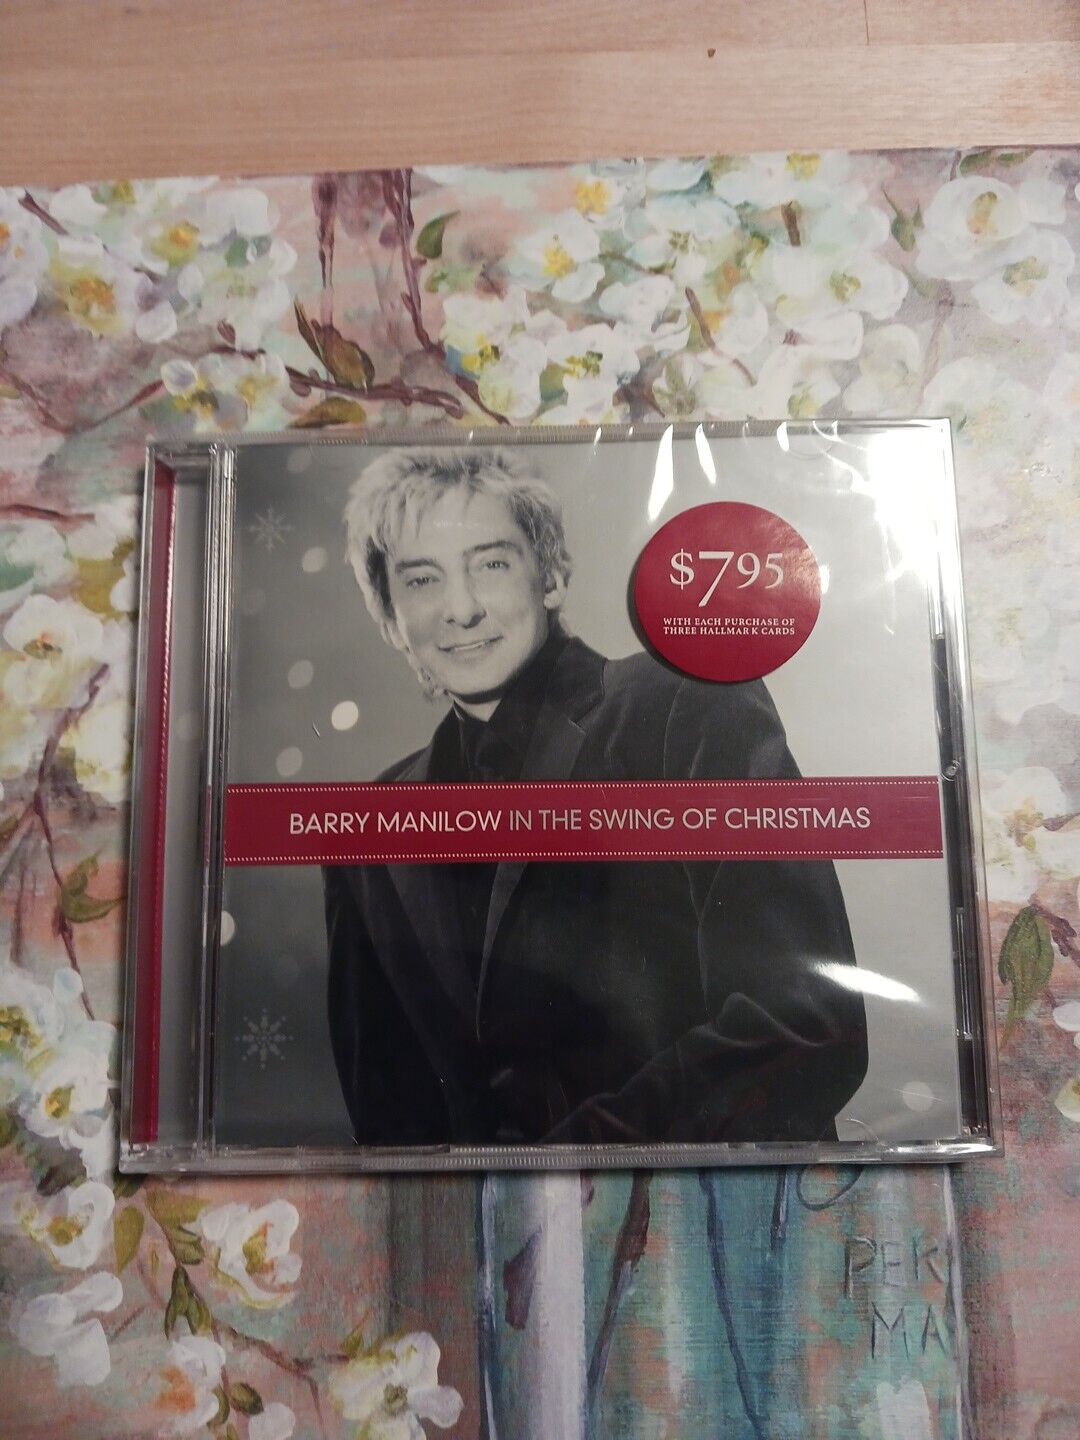 Barry Manilow In The Swing Of Christmas CD 2007 Hallmark Barry Manilow BRAND NEW